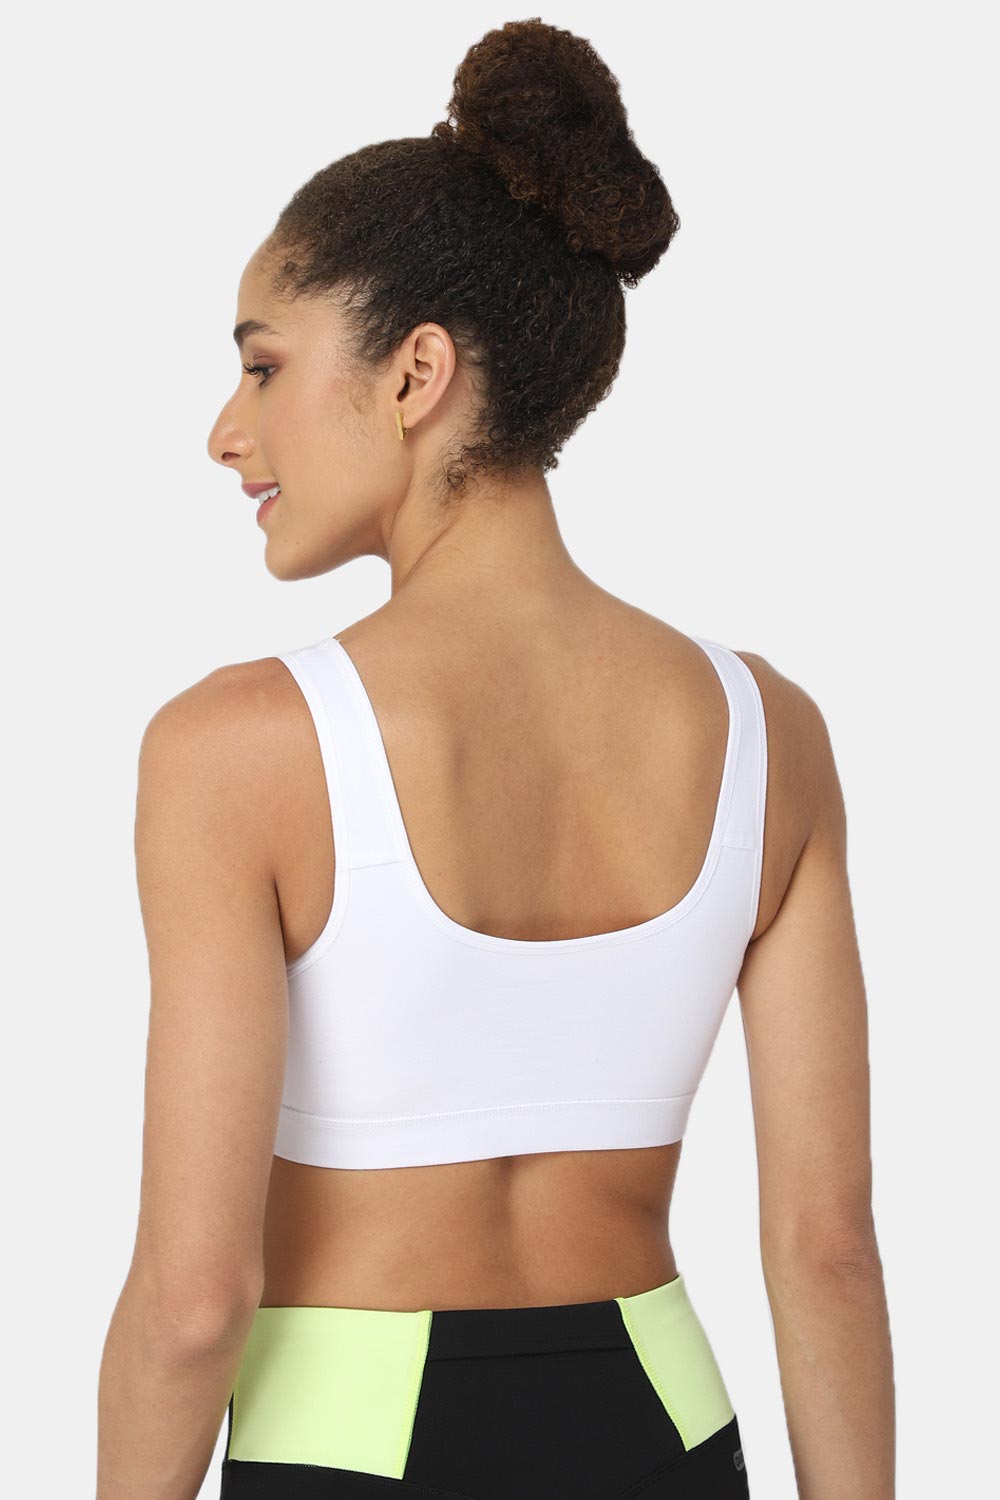 Intimacy Athleisure-Bra Special Combo Pack - CA01 - C02